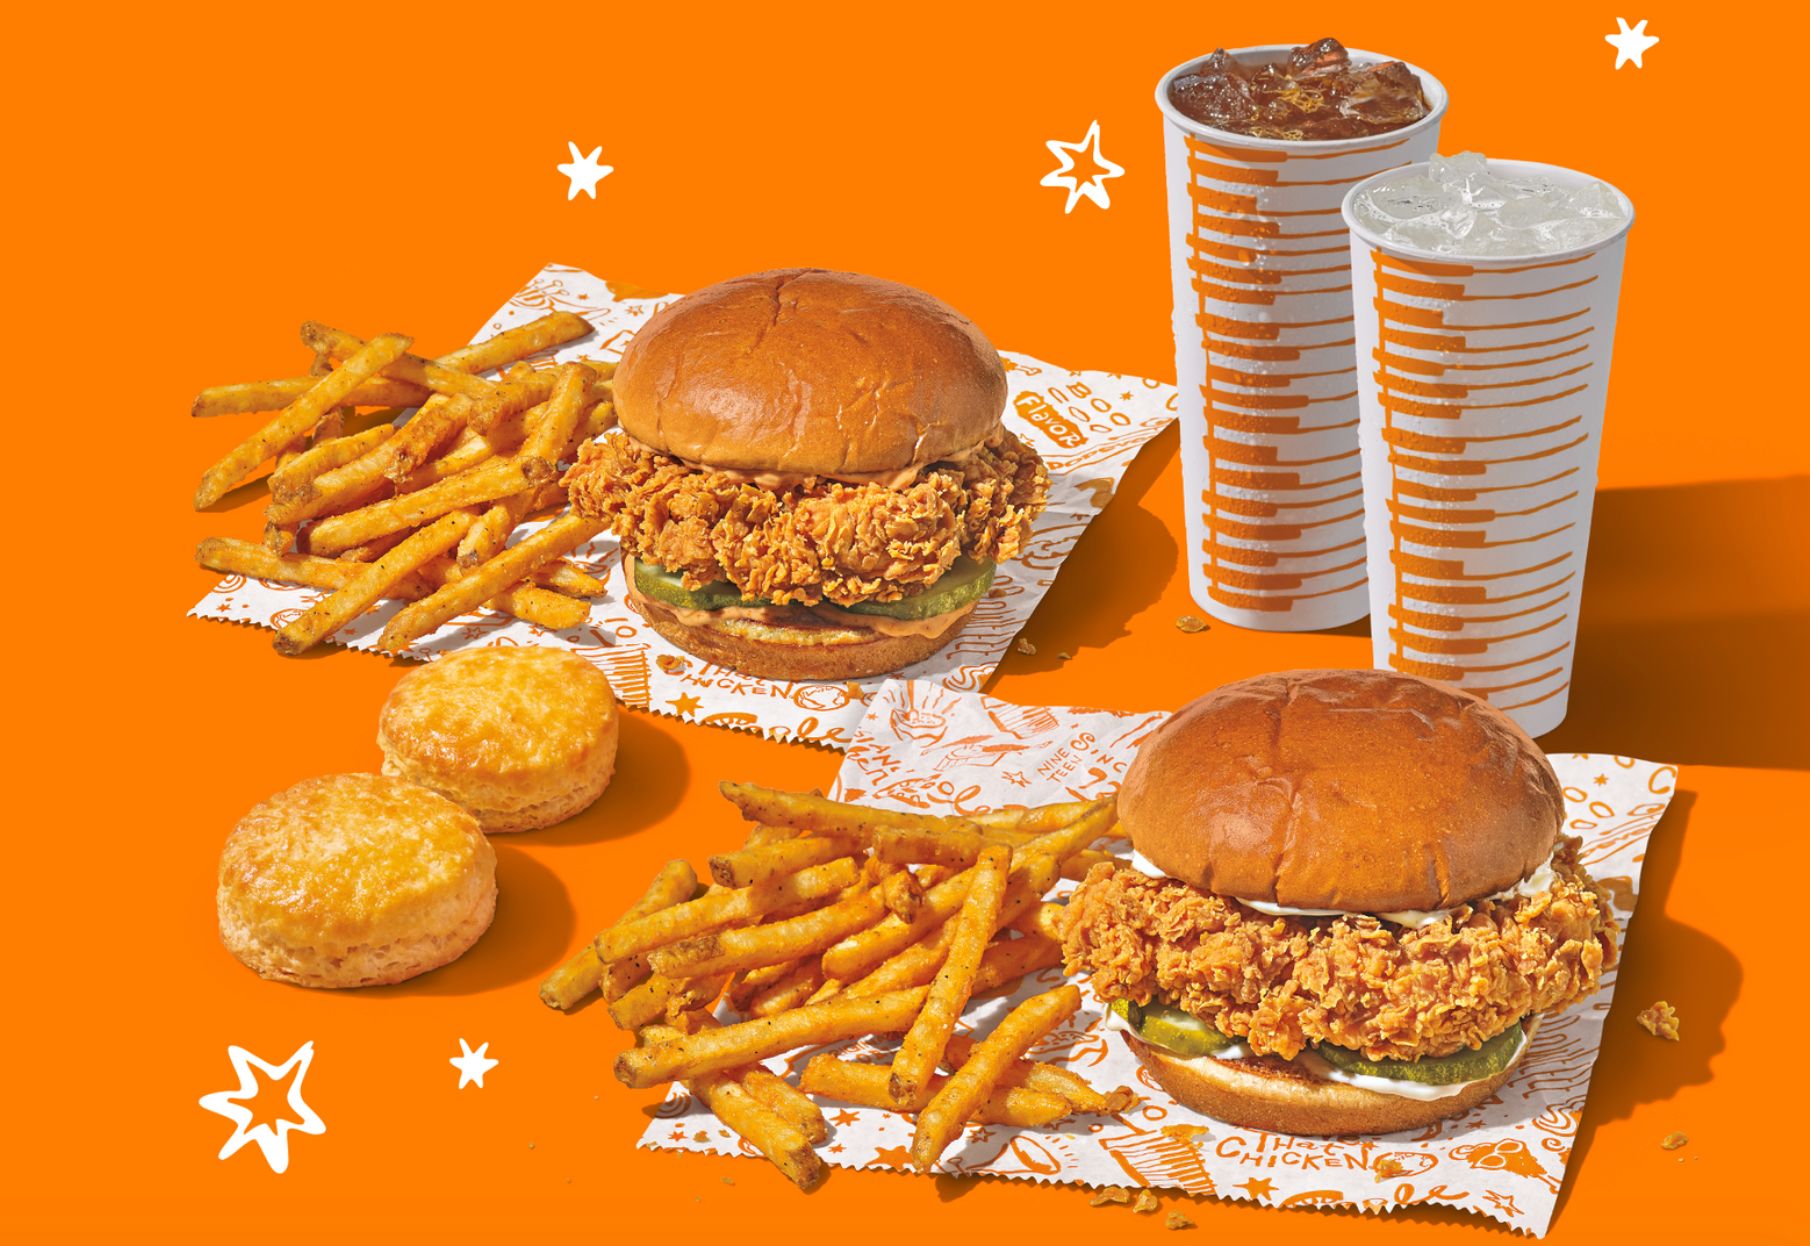 Popeyes Chicken Introduces their New 18 Double Sandwich Combo with